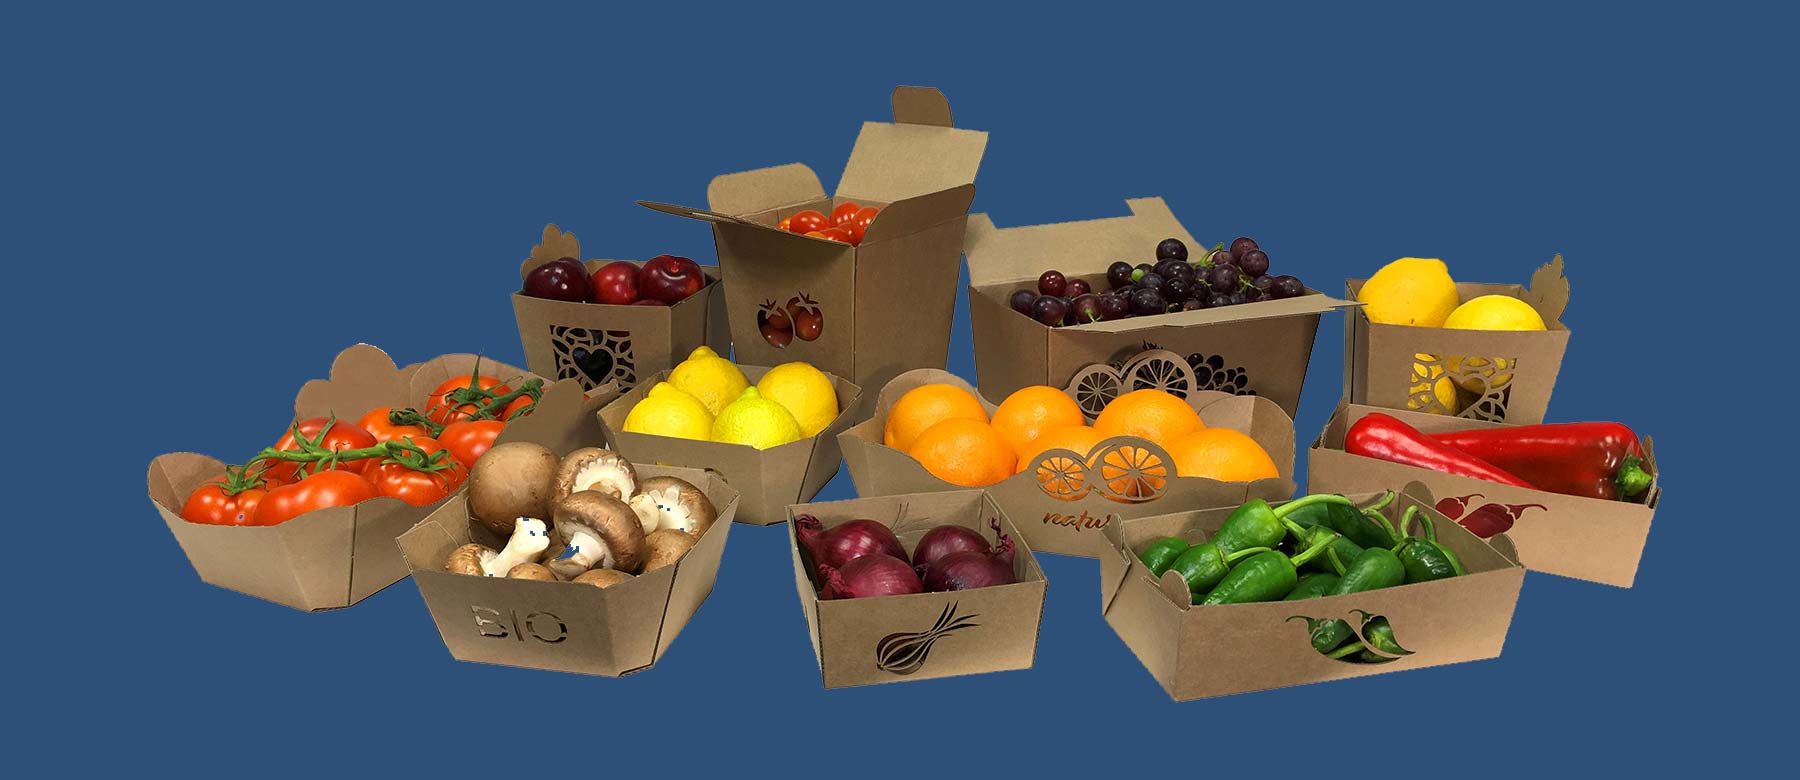 Sustainable boxes for food service and wholesale